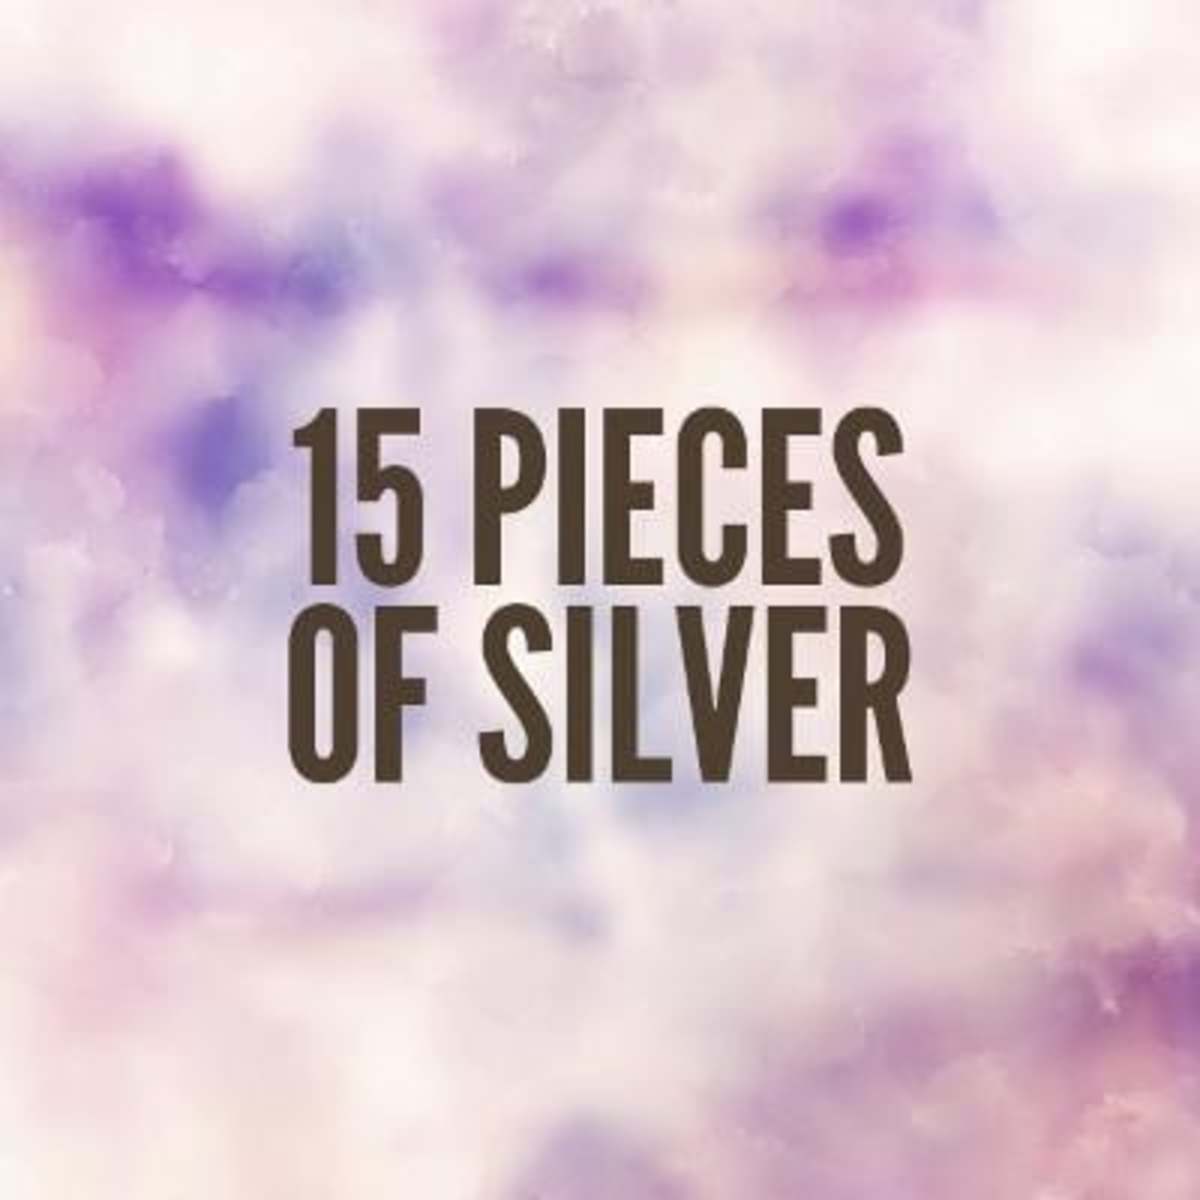 why-jesus-was-betrayed-for-thirty-pieces-of-silver